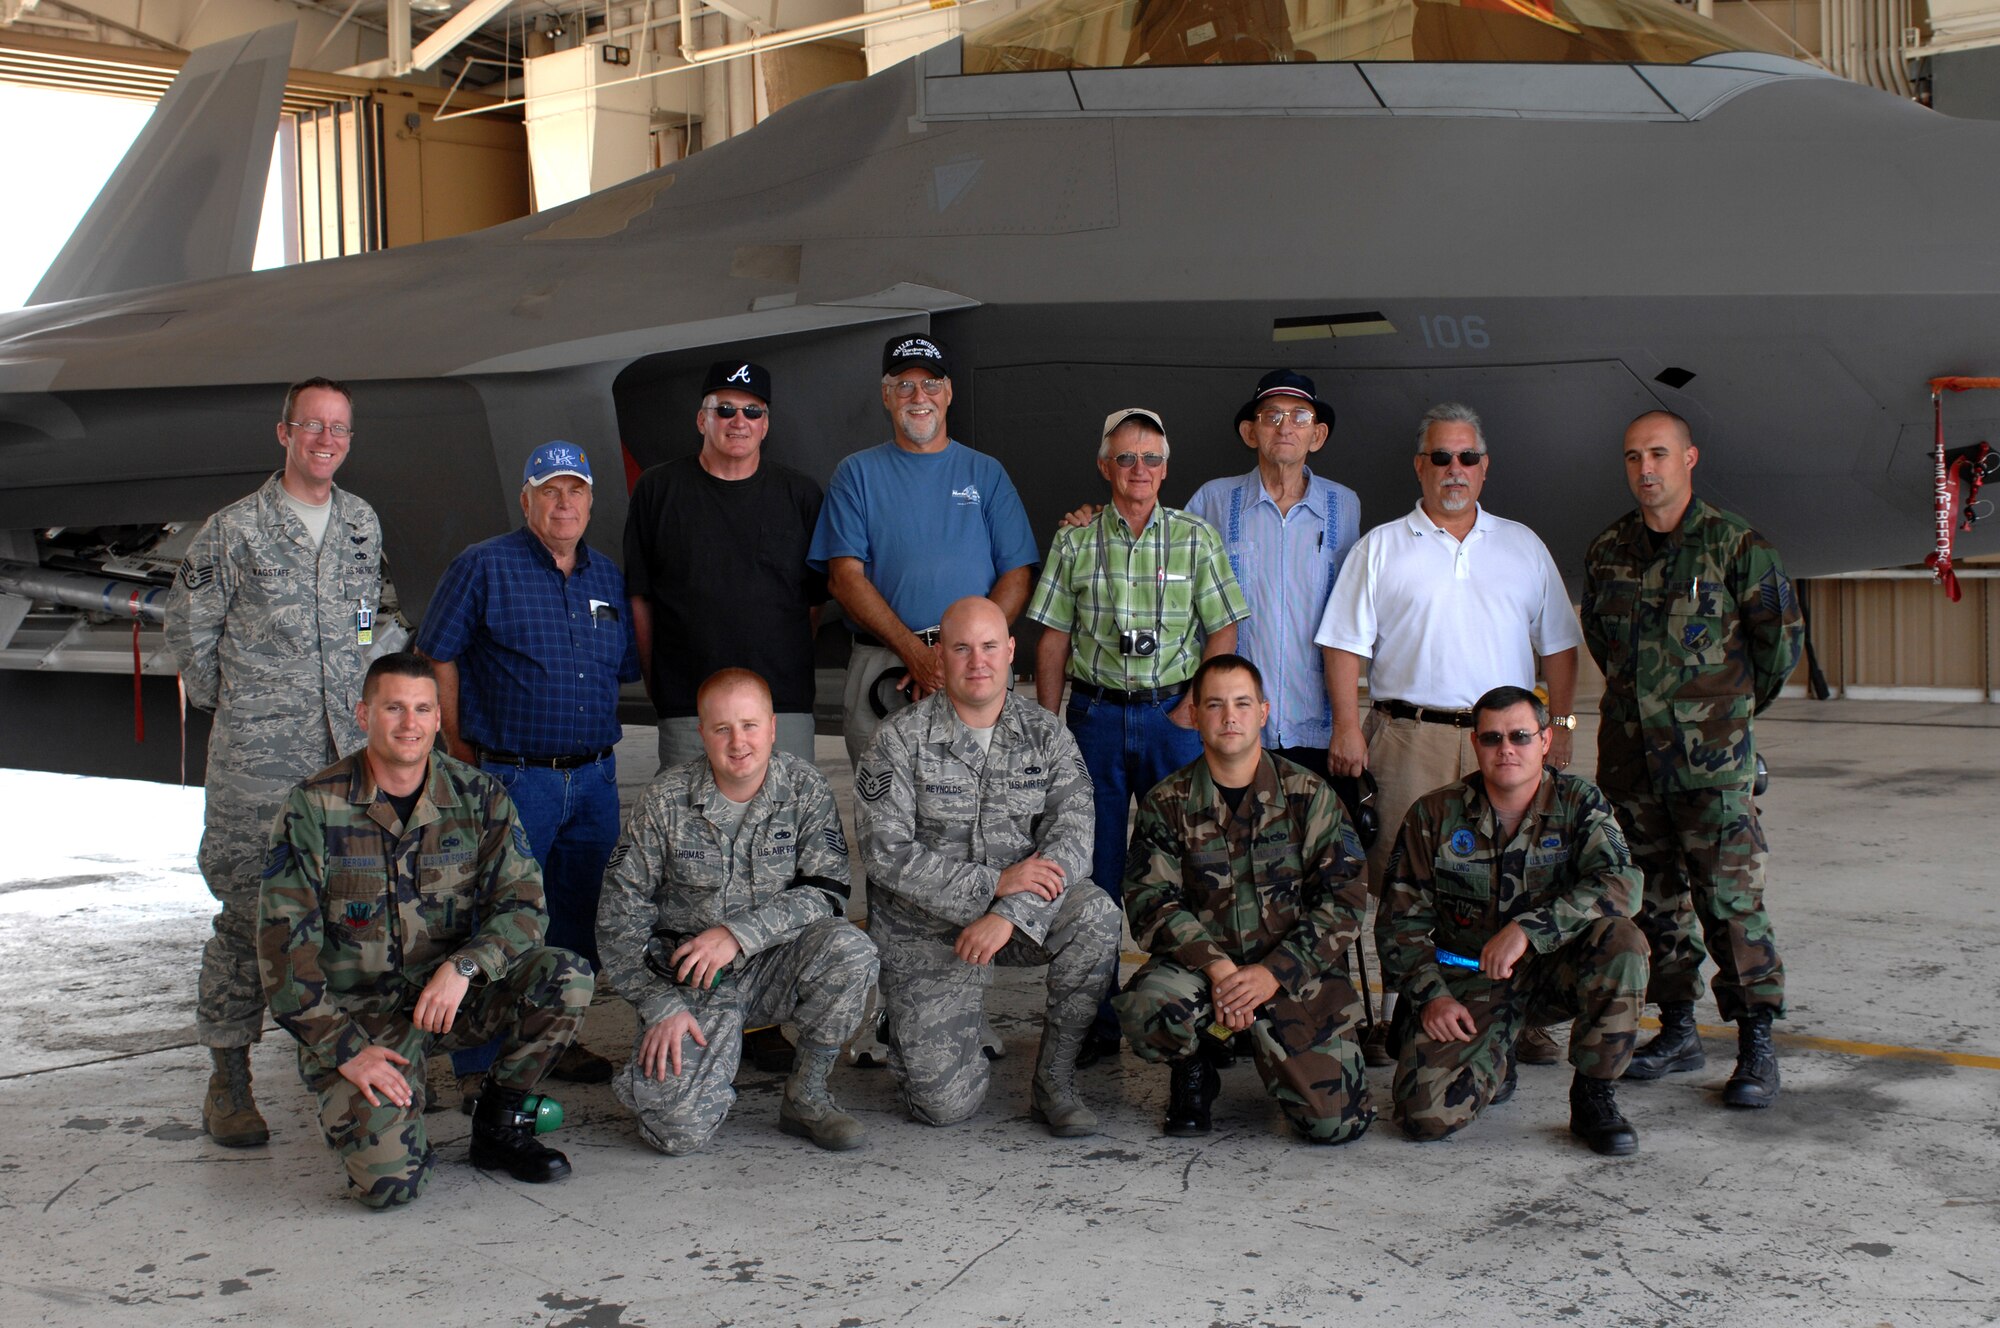 Six former crew chiefs from the 8th Fighter Squadron pose for a photograph in front of the F-22A Raptor with members from the 49th Aircraft Maintenance Squadron at Holloman Air Force Base, N.M., September 26. The veterans all worked together in 1968 when the 8 FS was relocated from Spangdahlem Air Base, Germany, to Holloman, and were visiting as part of its 40 year reunion. (U.S. Air Force photo/Airman Sondra M. Escutia)